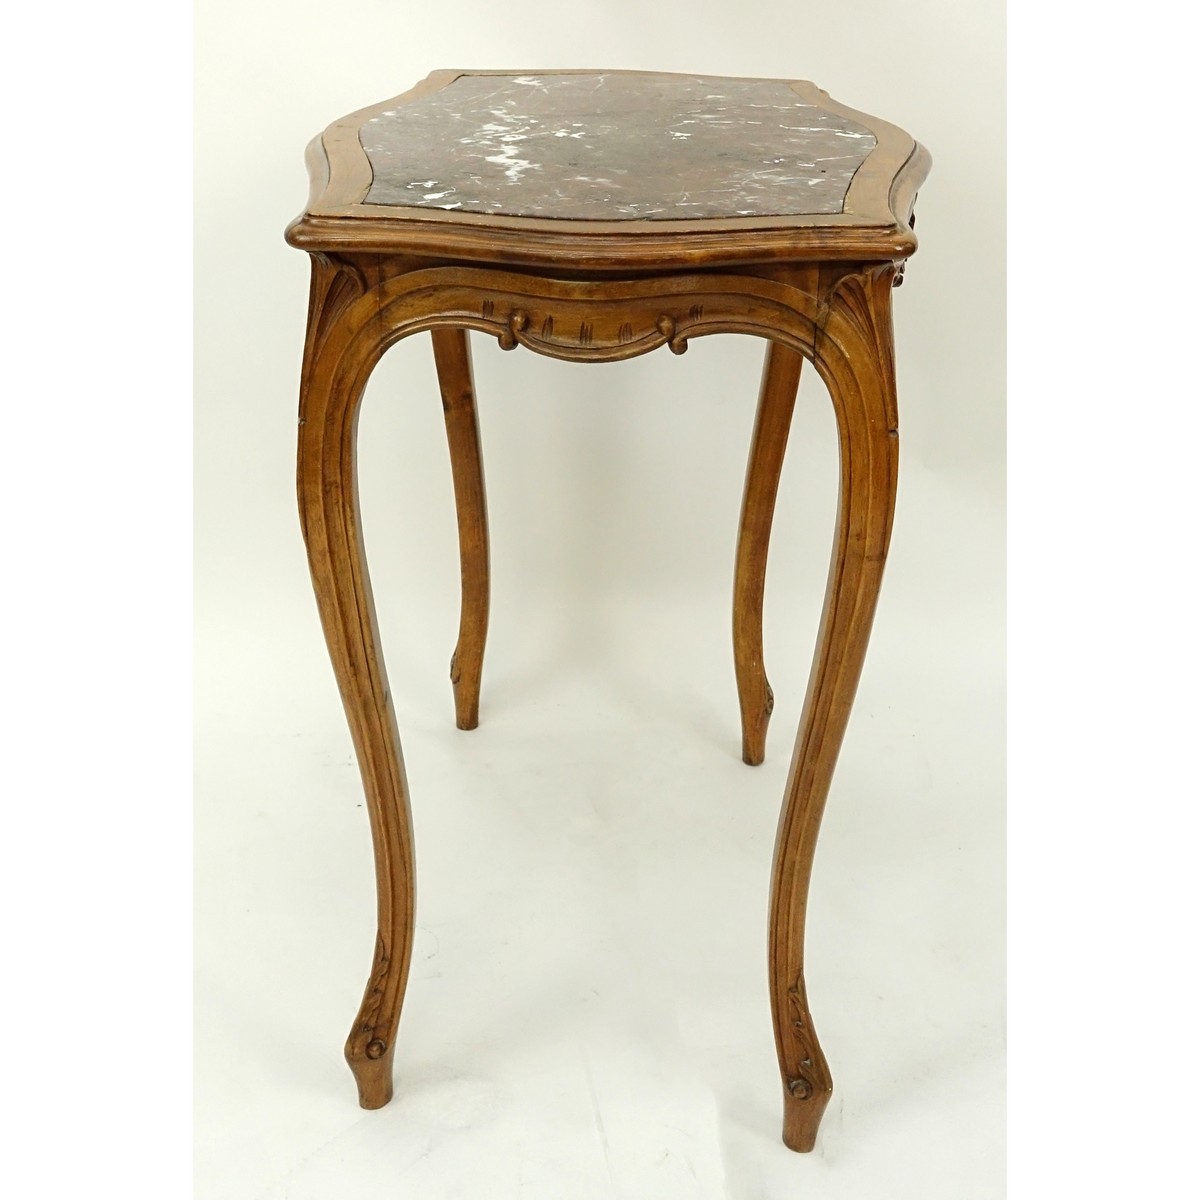 19/20th Century French Carved Wood Table with Marble Top. Carved apron with high cabriole legs.